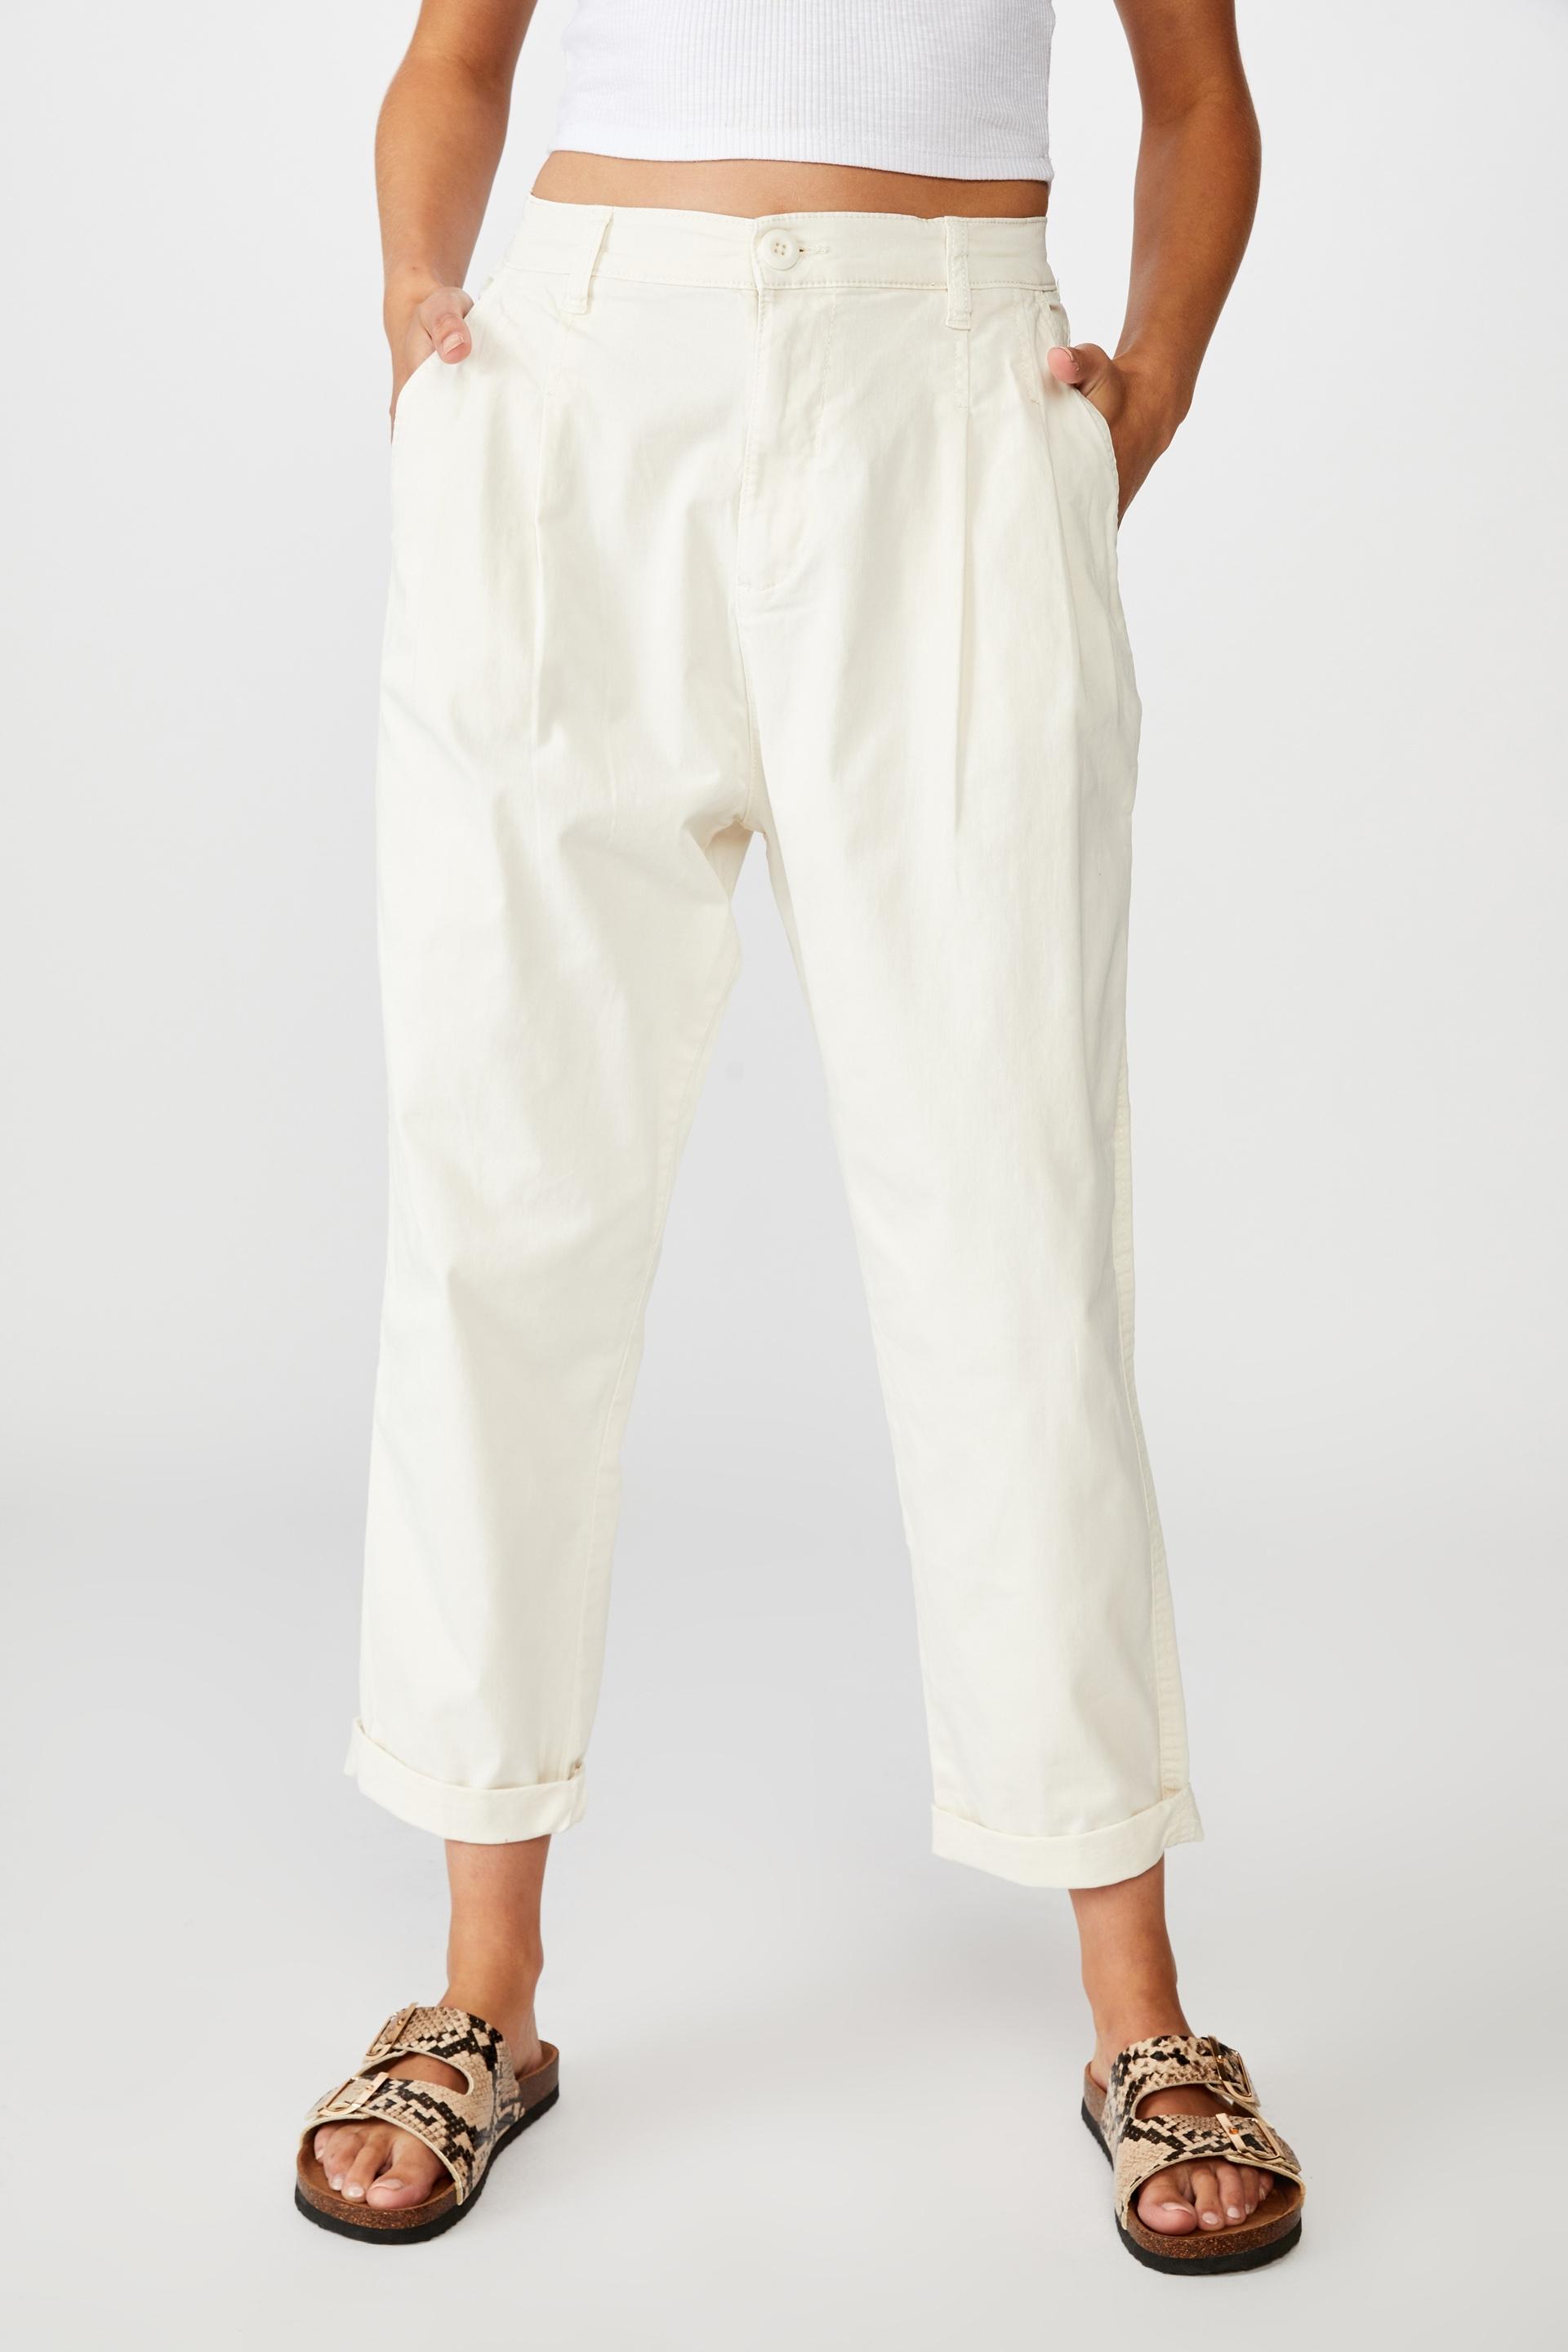 Hunter pleated pant - neutral Cotton On Trousers | Superbalist.com